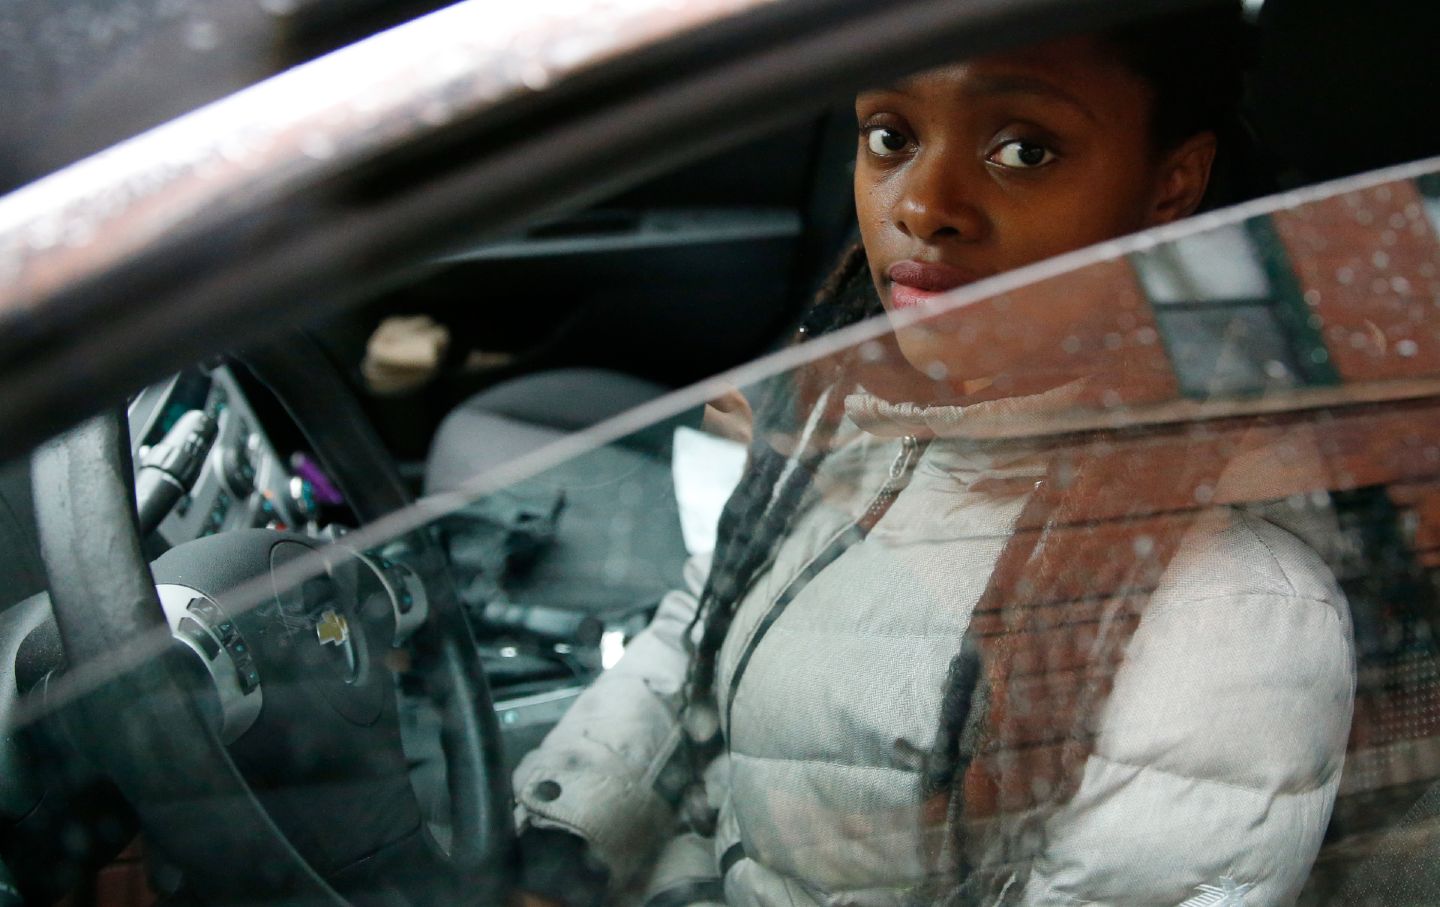 A woman sits in her car, which police had seized for a crime she did not commit.